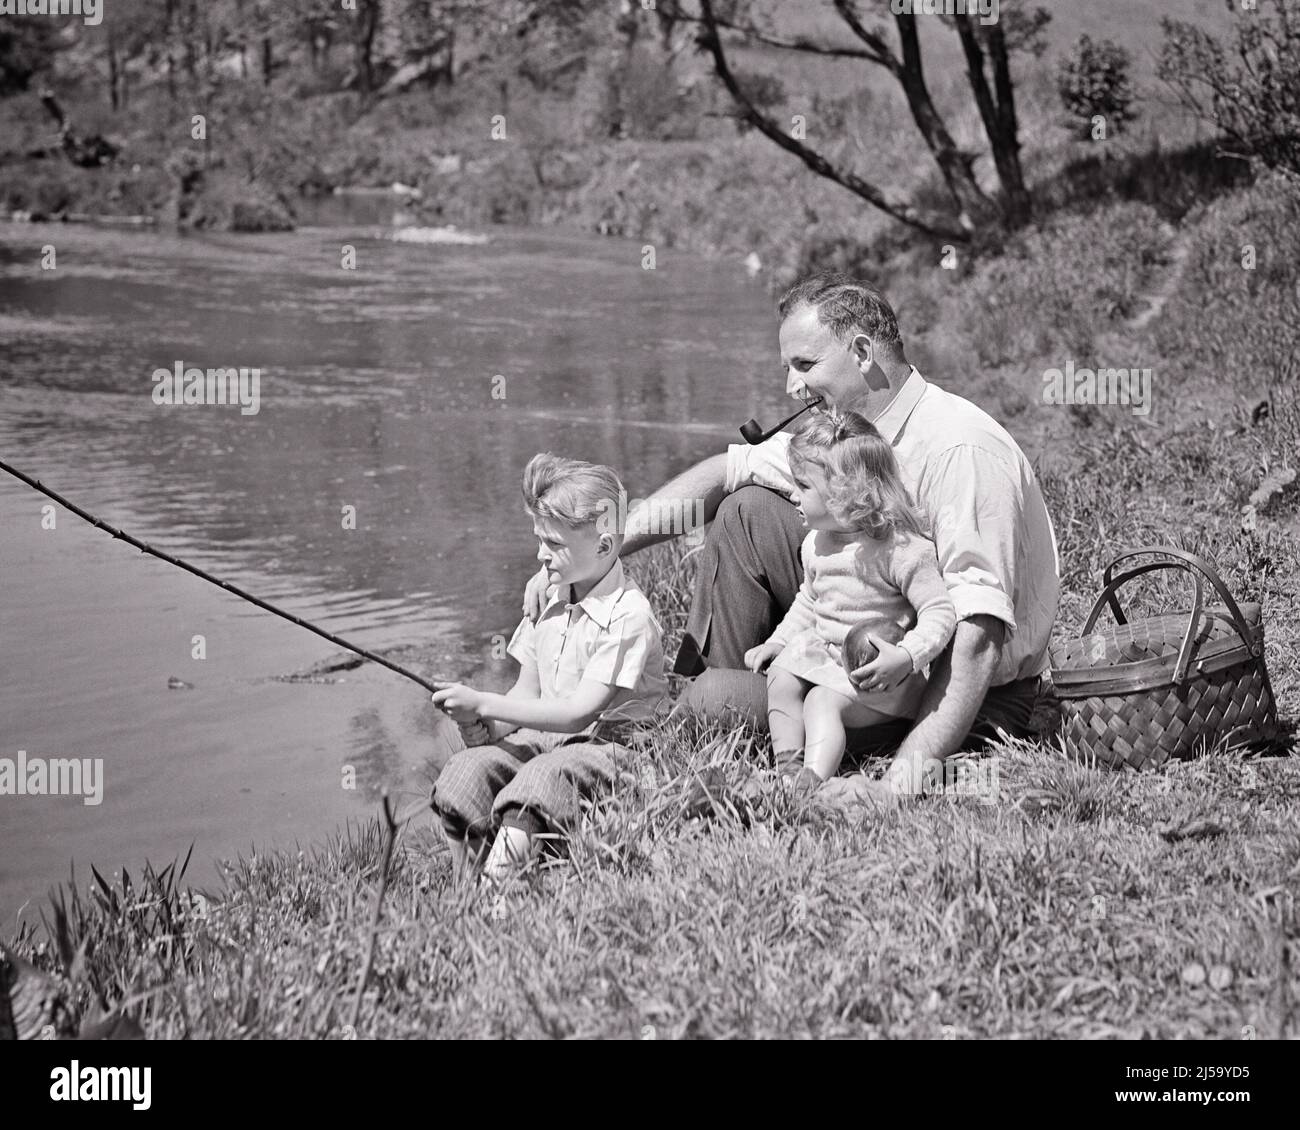 1930s FAMILY FISHING FATHER SITTING BY STREAM HIS SON HAS FISHING POLE IN WATER DAUGHTER SITTING ON HIS LAP BESIDE PICNIC BASKET - j2596 HAR001 HARS 3 DAD MEAL SMOKE NOSTALGIC PAIR BEAUTY SUBURBAN OLD TIME RIVER NOSTALGIA BROTHER OLD FASHION SISTER 1 JUVENILE POLE SECURITY YOUNG ADULT SAFETY POND TEAMWORK SONS PLEASED FAMILIES JOY LIFESTYLE FEMALES BROTHERS PIPE RURAL HEALTHINESS HOME LIFE COPY SPACE FULL-LENGTH HALF-LENGTH DAUGHTERS PERSONS INSPIRATION STREAM CARING MALES HOOK SERENITY SIBLINGS CONFIDENCE SISTERS FATHERS B&W LAP CATCHING SUCCESS HAPPINESS WELLNESS CHEERFUL ADVENTURE HIS Stock Photo